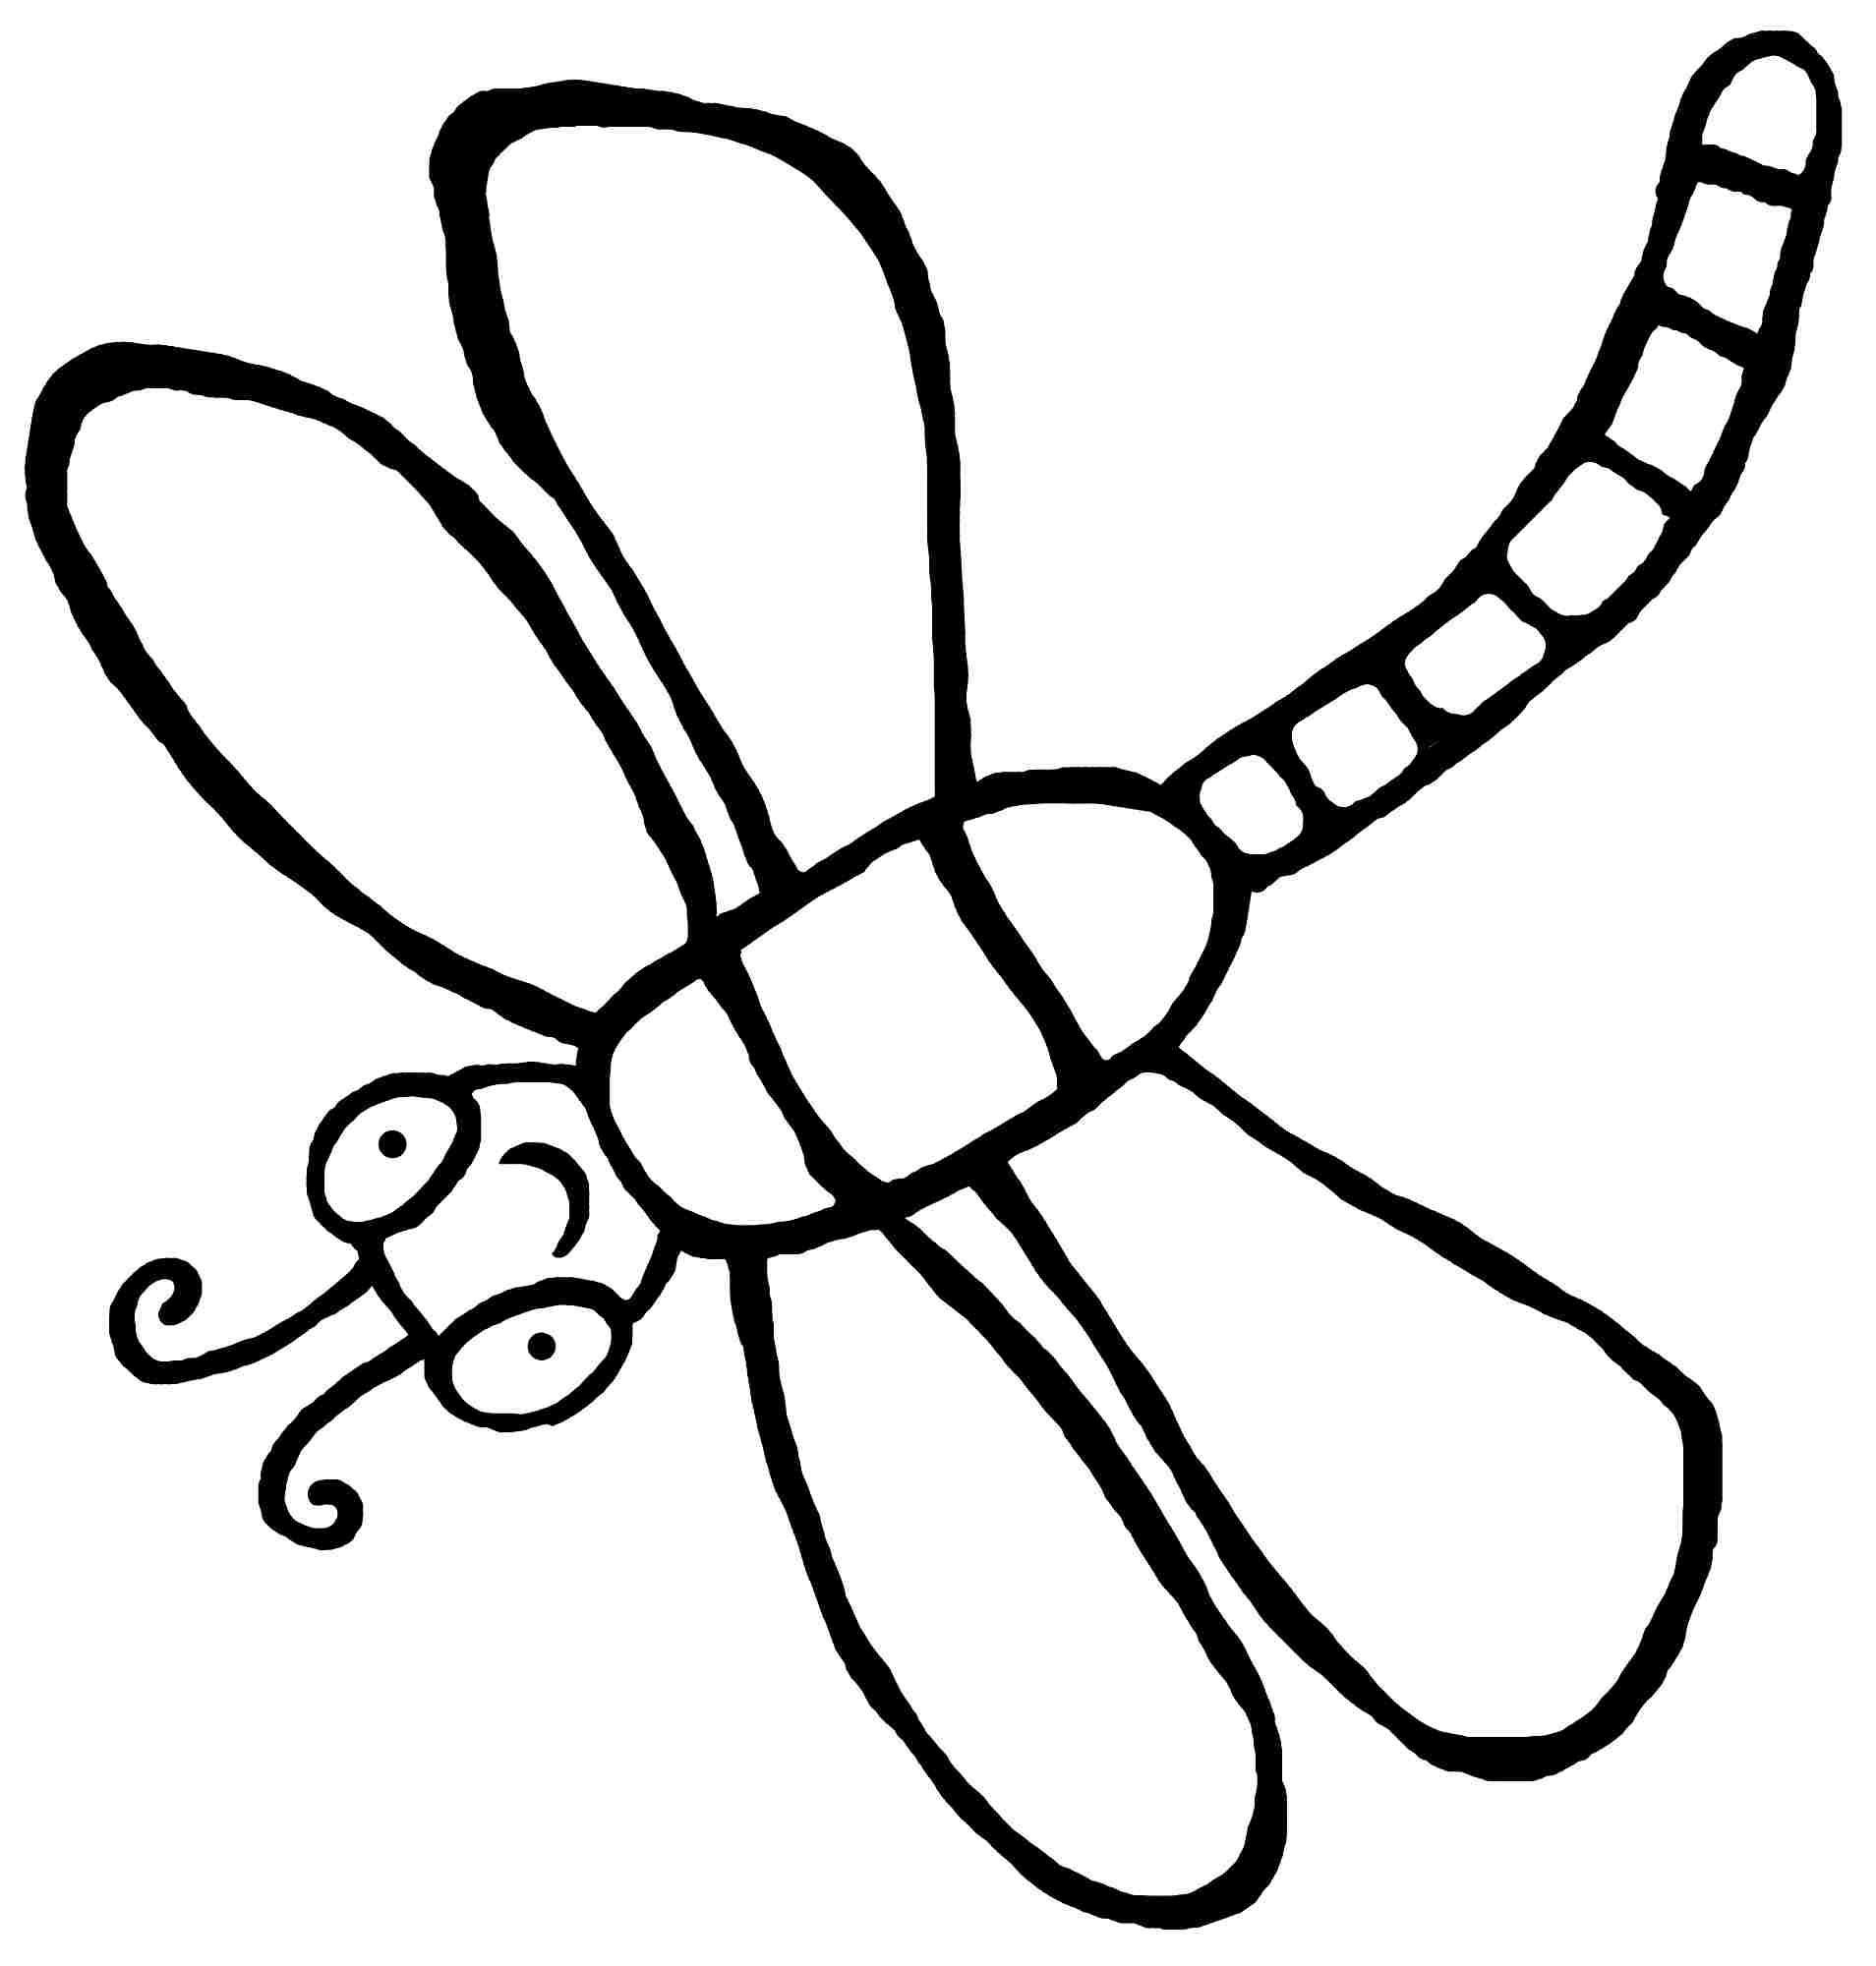 Dragonfly Coloring Pages Printable at GetColorings.com | Free printable